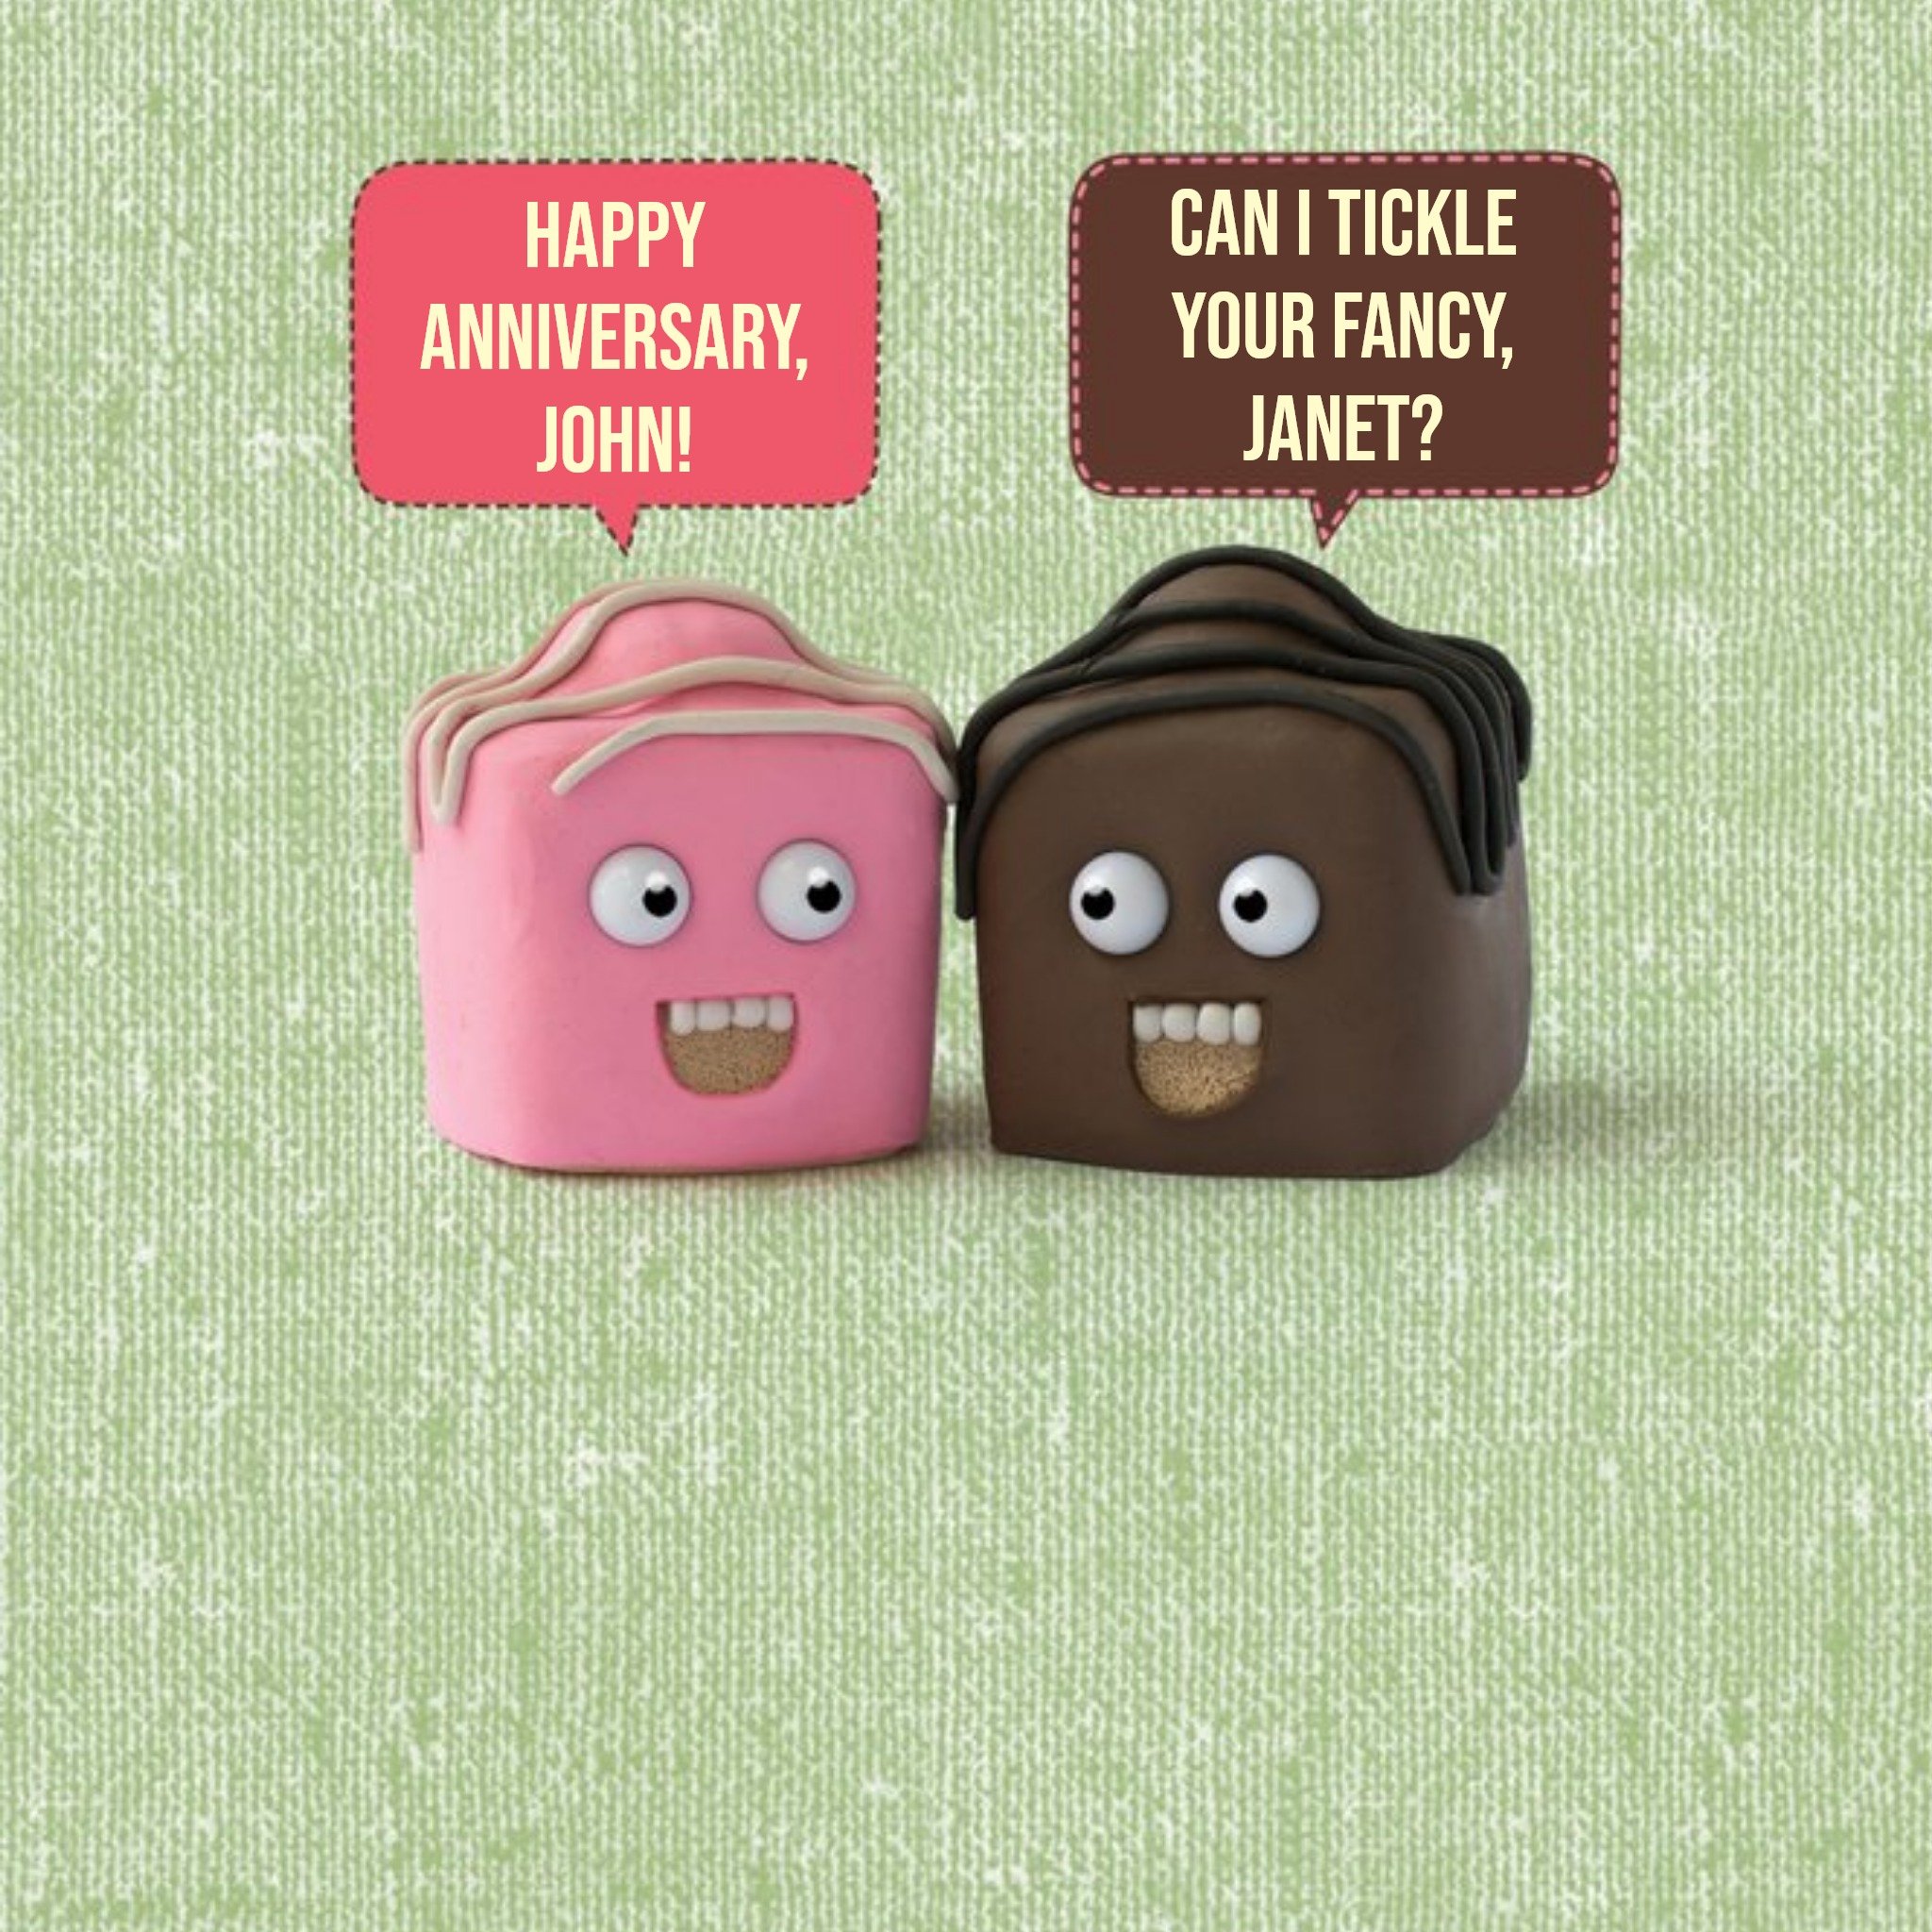 Moonpig Chocolate Truffles Can I Tickle Your Fancy Personalised Anniversary Card, Square